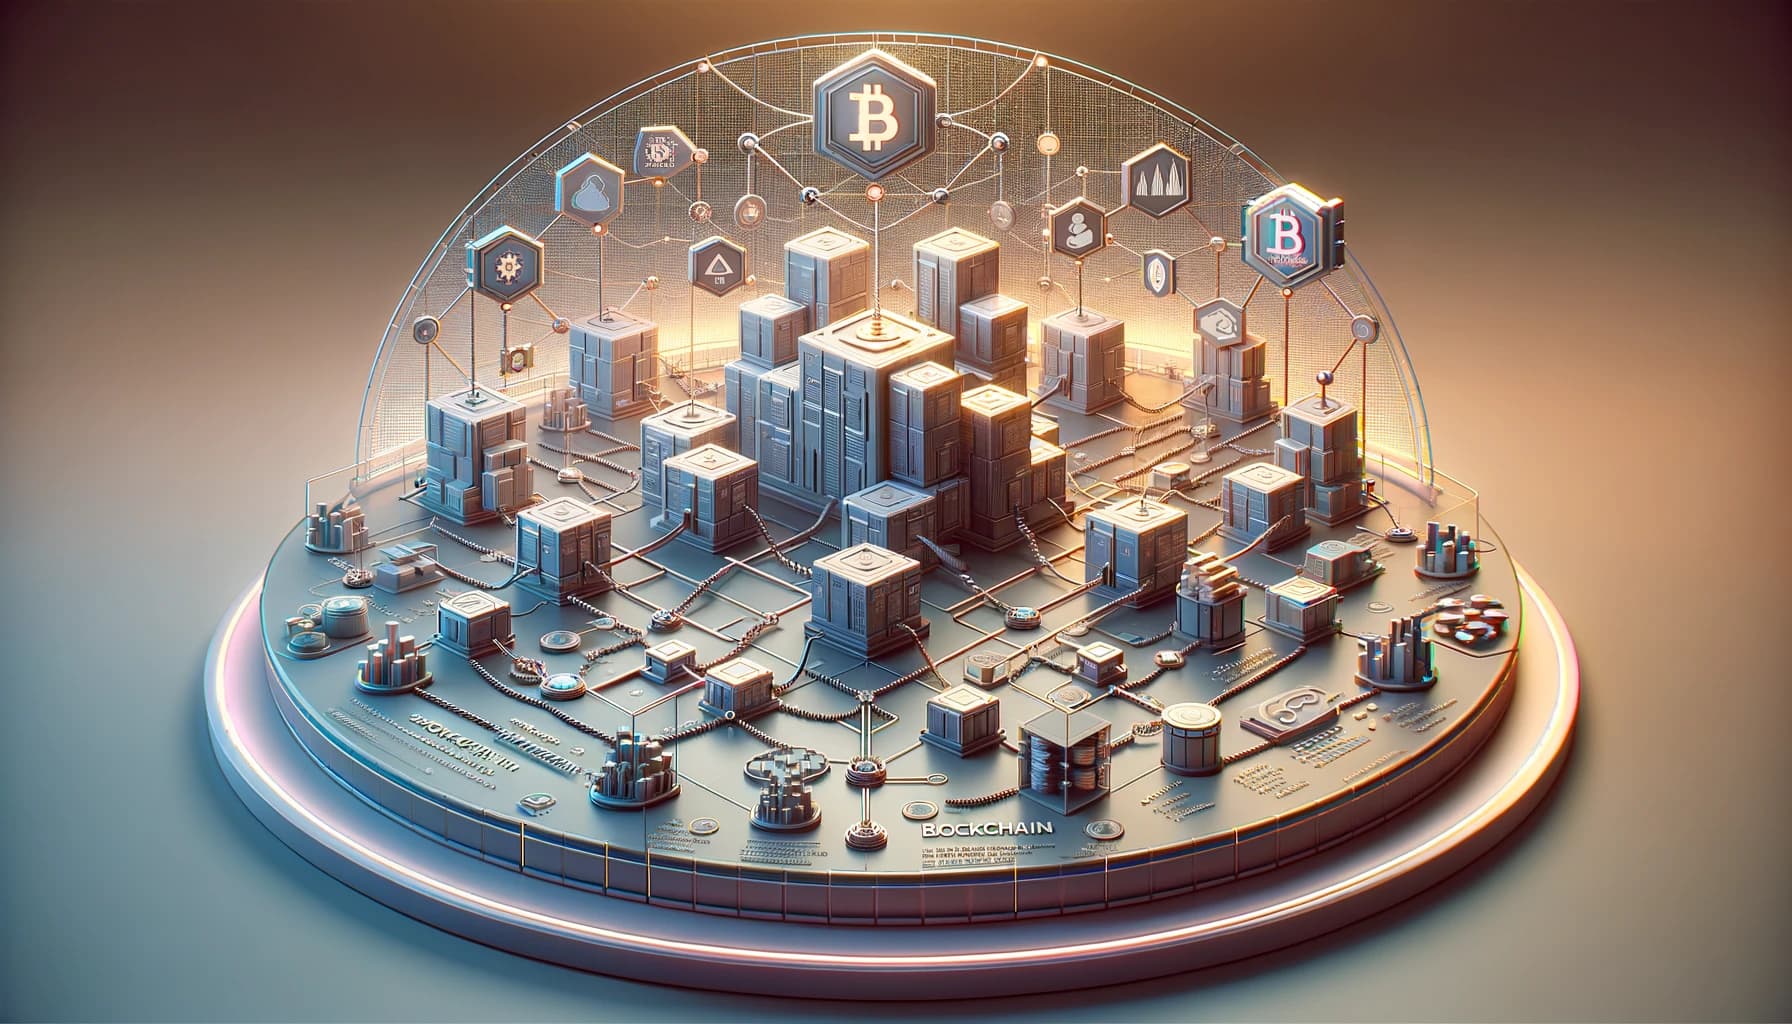 Bucket Technologies image showing a series of floating bitcoin icons all contained within a clear dome, each floating above what appears to be a small town or a computer motherboard of sorts.